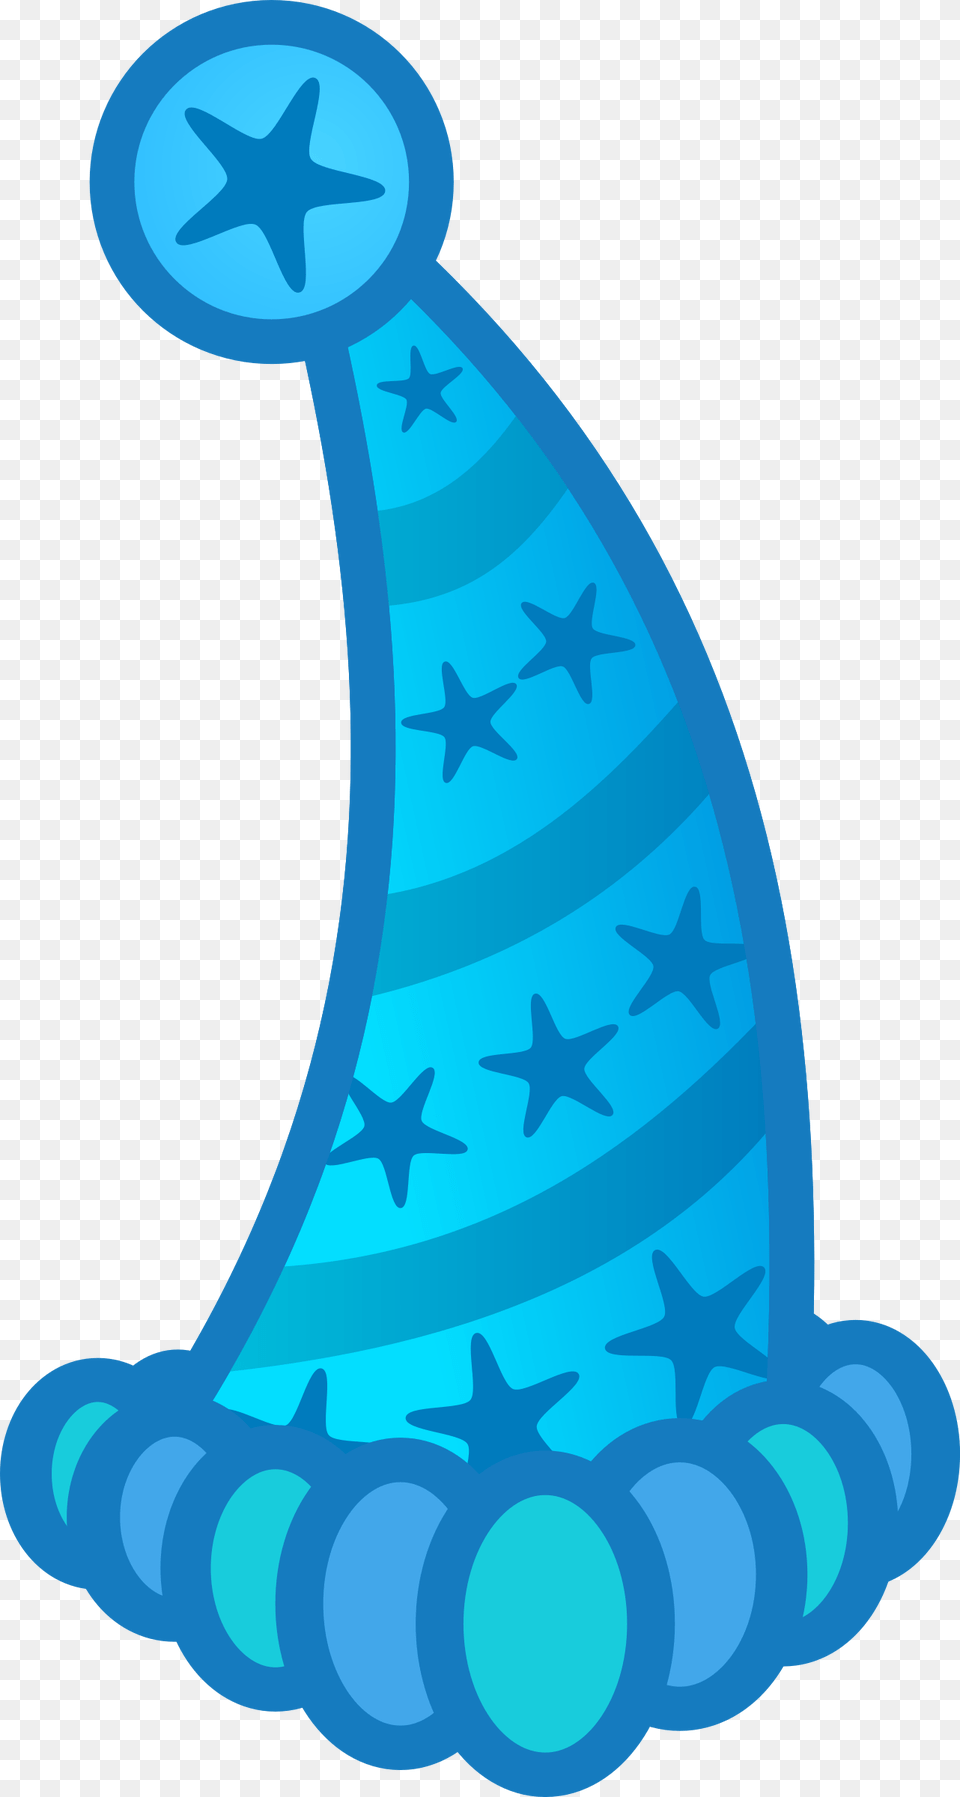 Party Hat Clip Arts Halloween Party Hats Vector, Clothing, Lighting, Outdoors, Nature Png